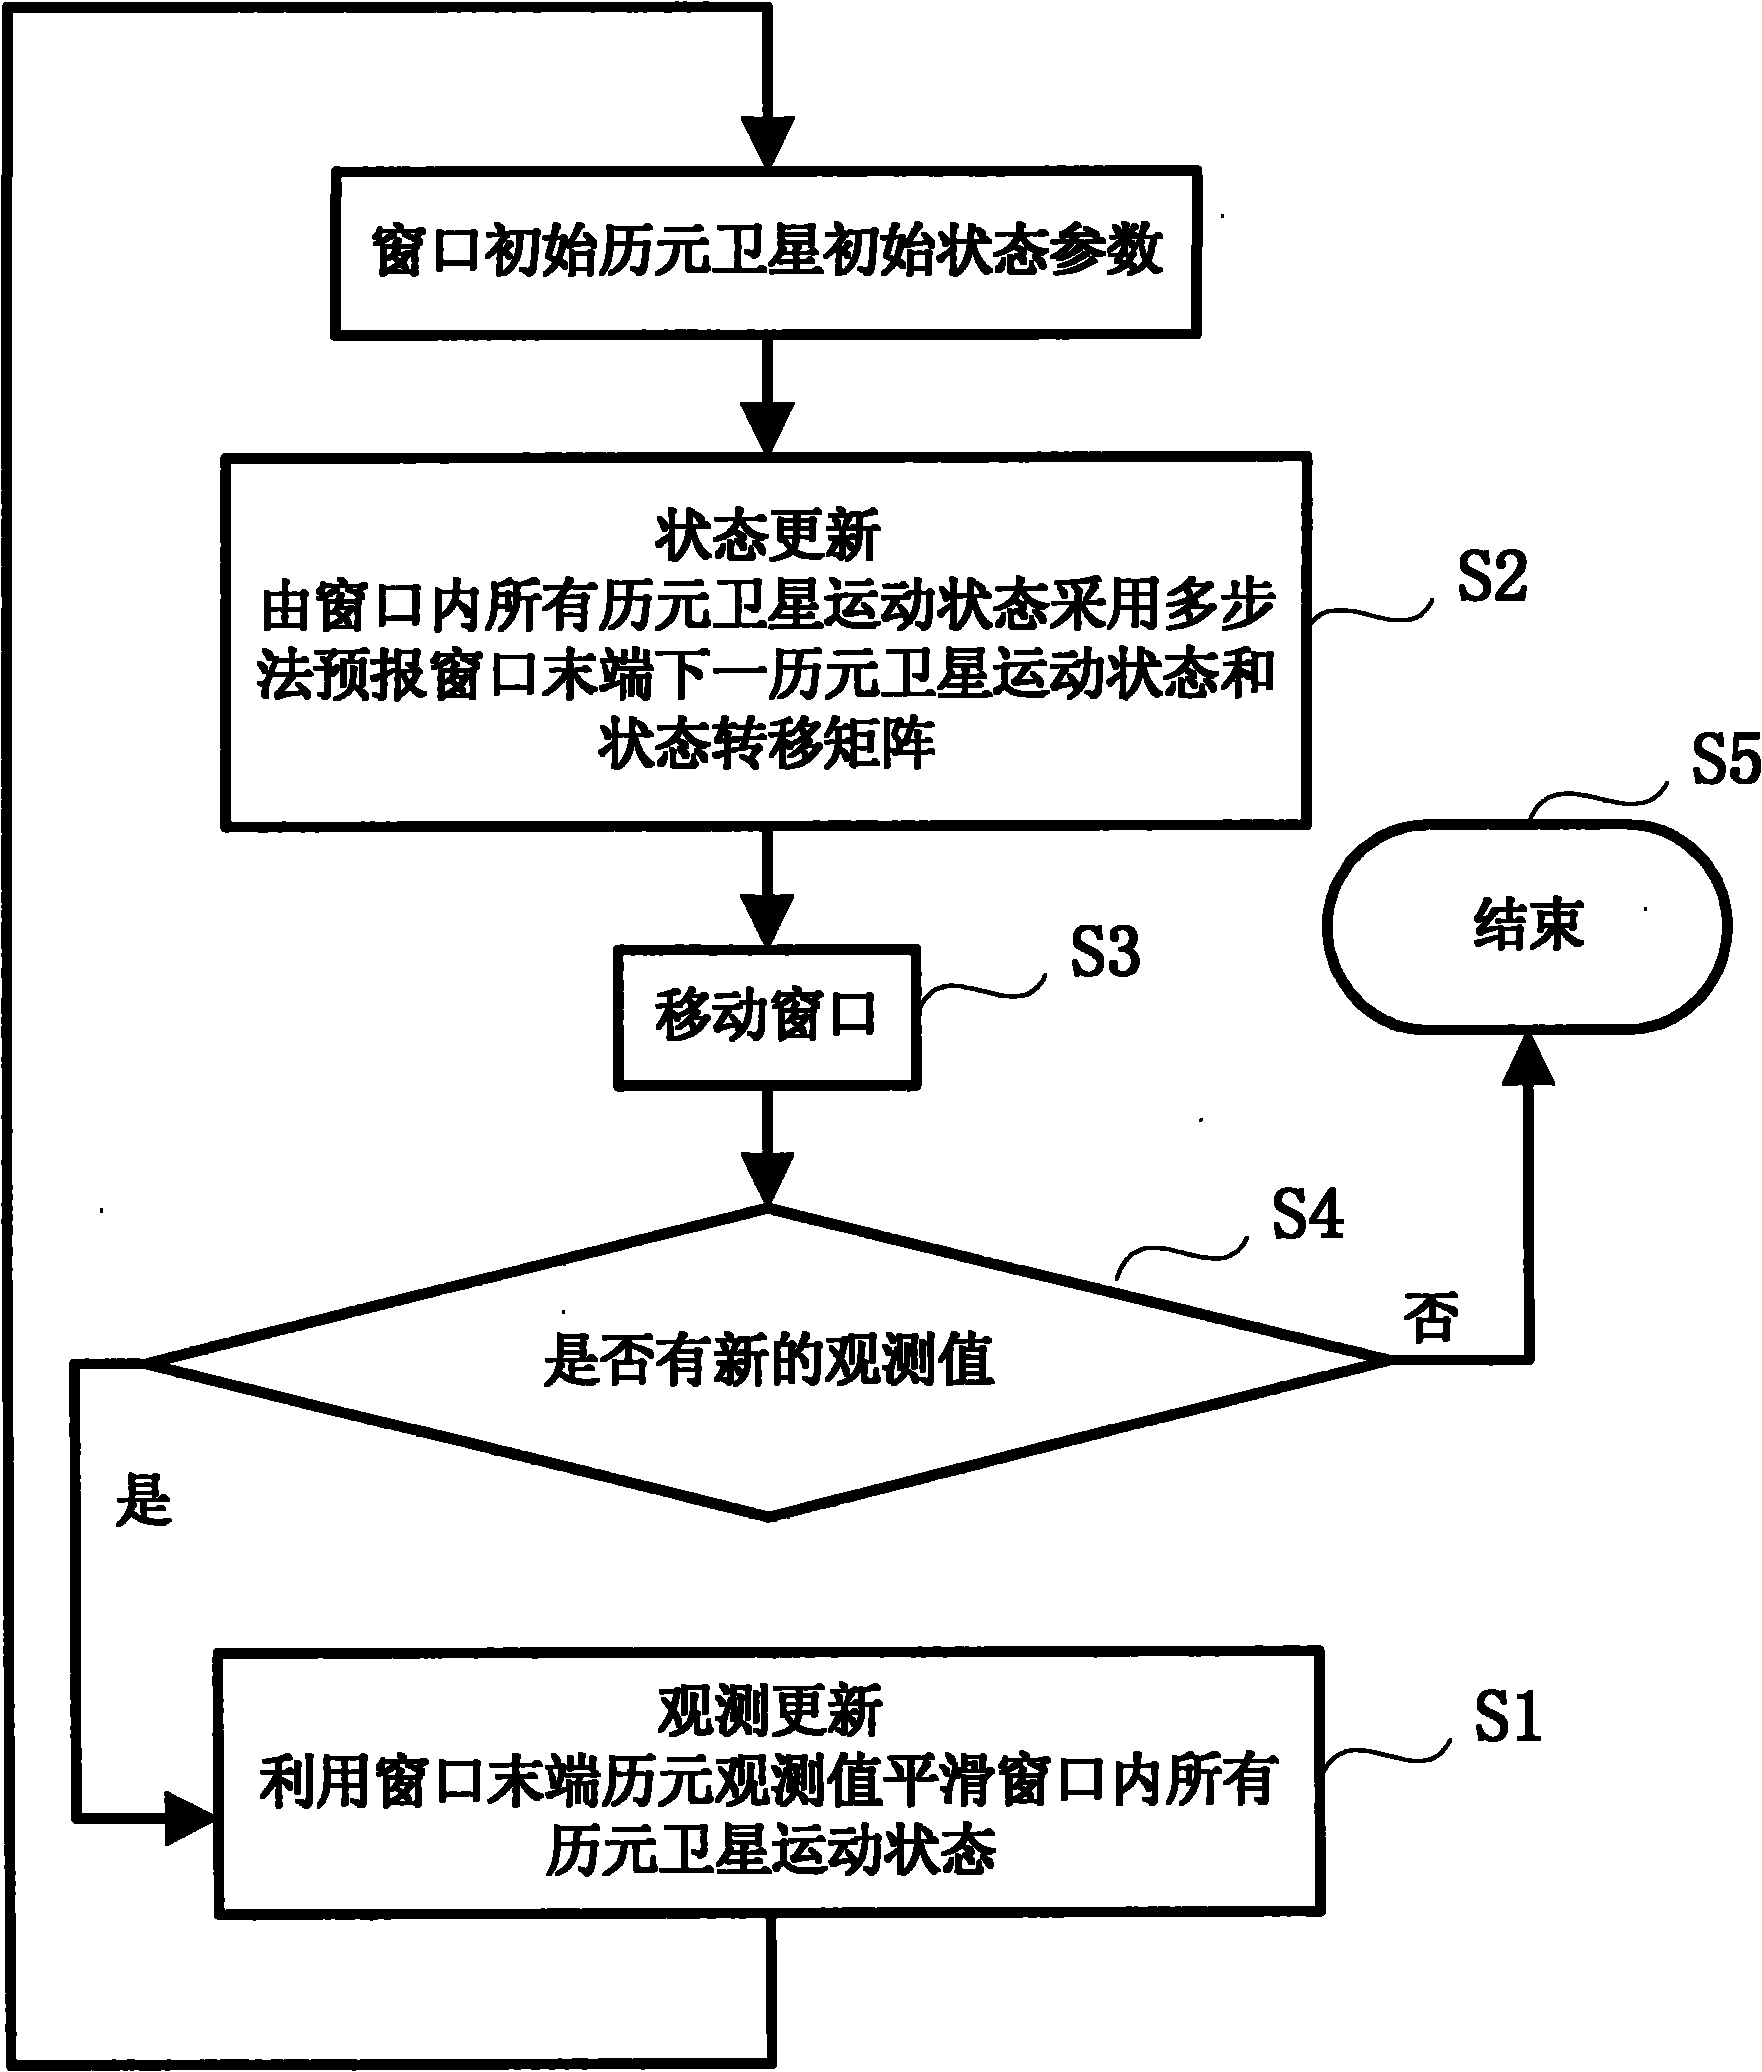 GPS (Global Position System) double-frequency real-time satellite borne data processing method